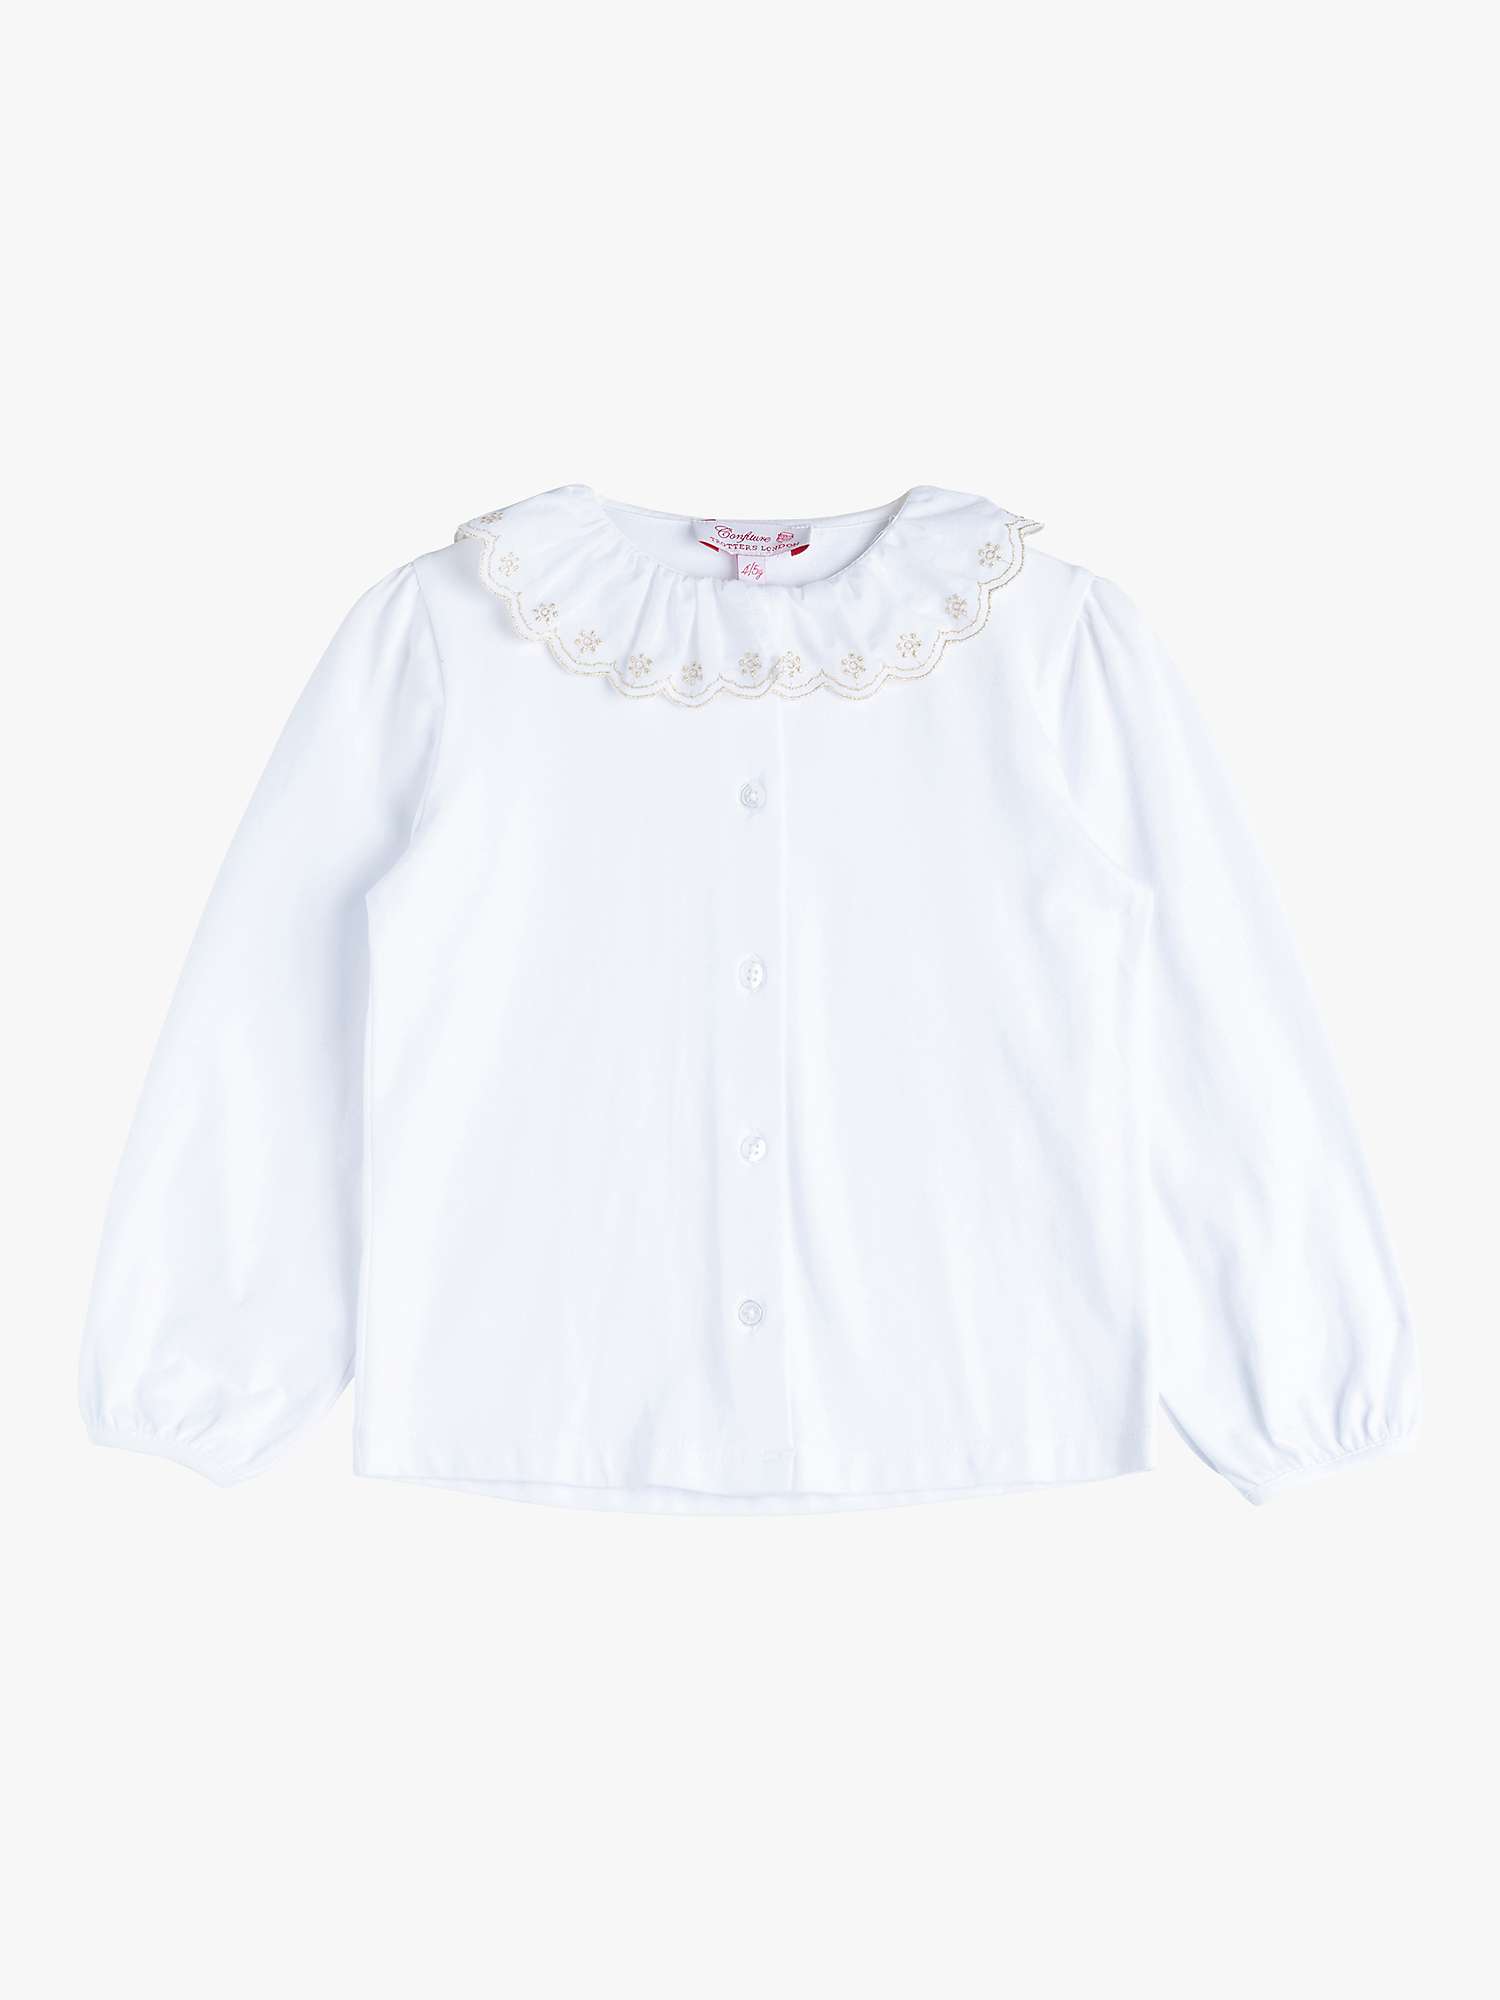 Buy Trotters Kids' Elsa Embroidered Blouse, White/Gold Online at johnlewis.com